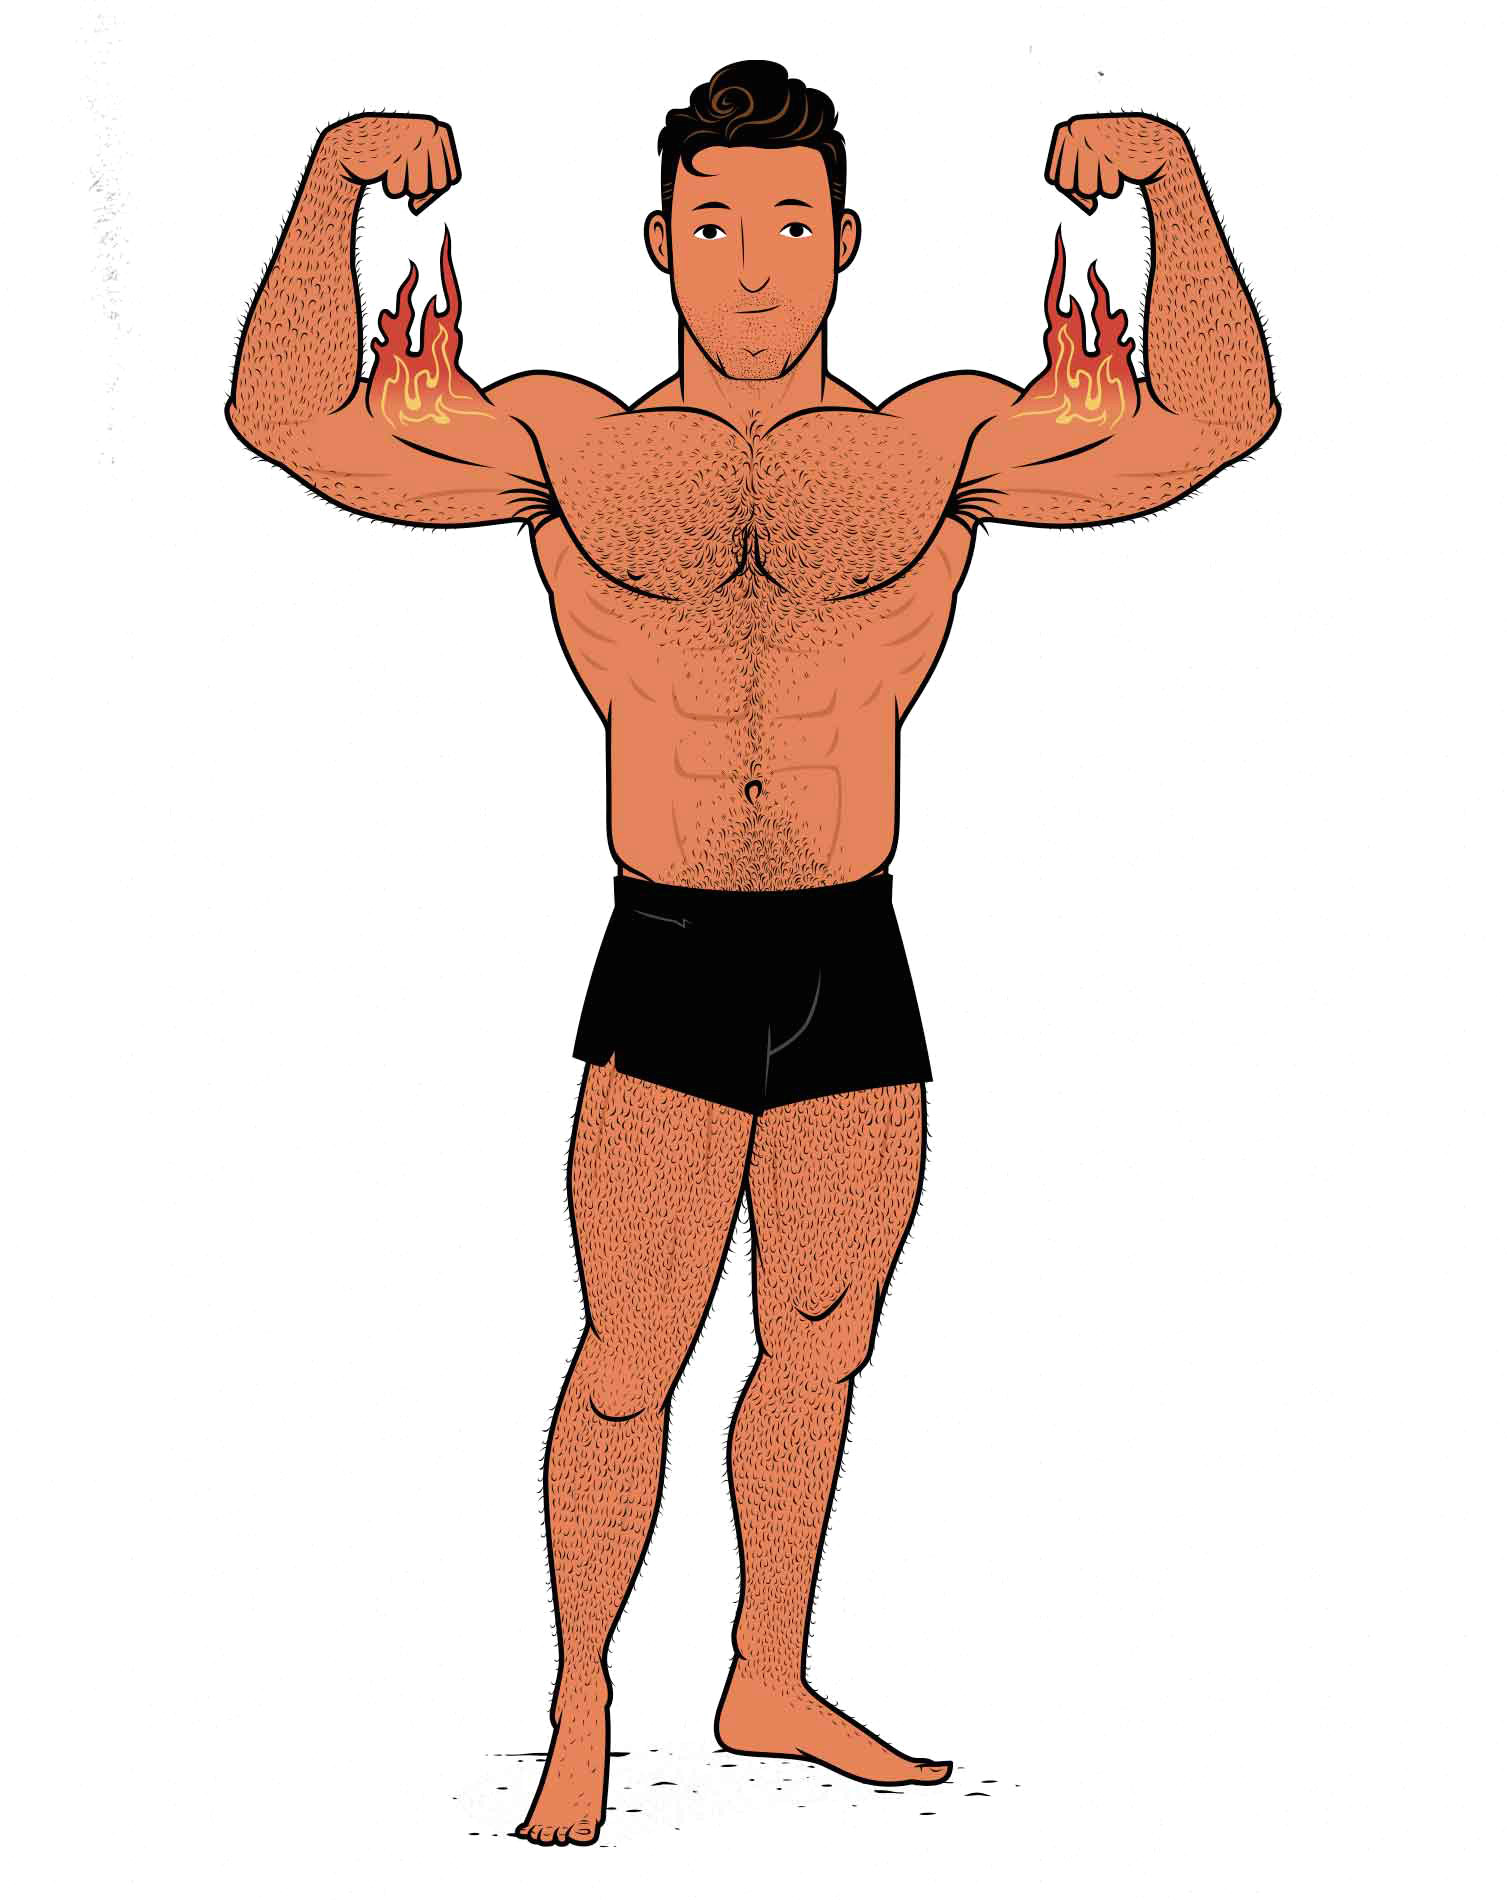 Illustration showing a bodybuilder flexing his arms.